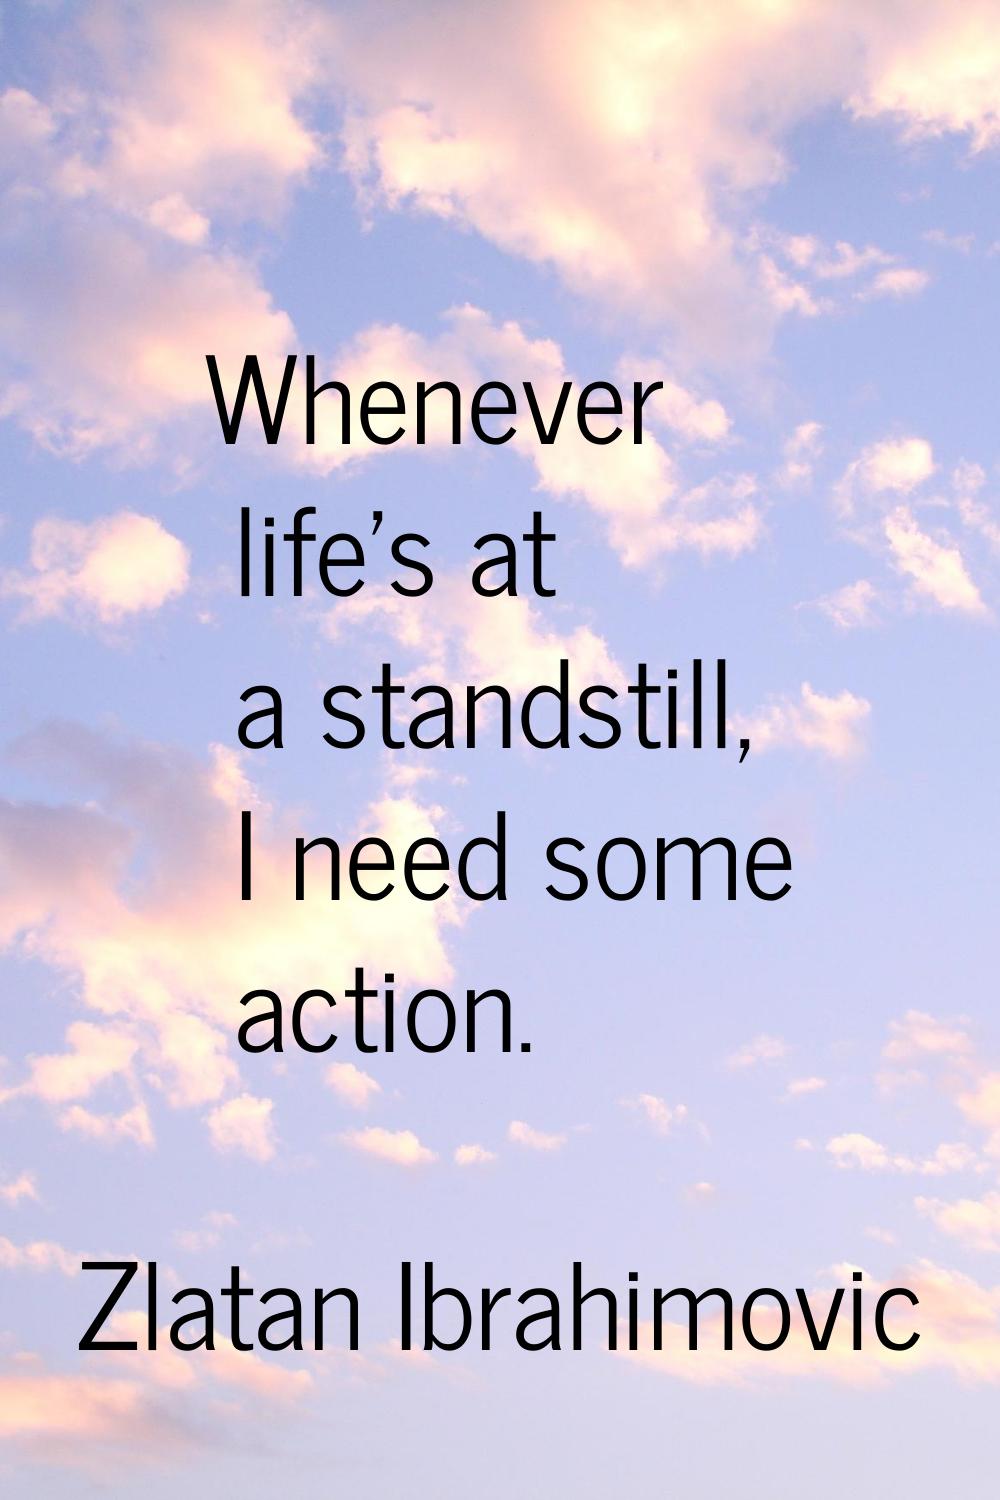 Whenever life's at a standstill, I need some action.